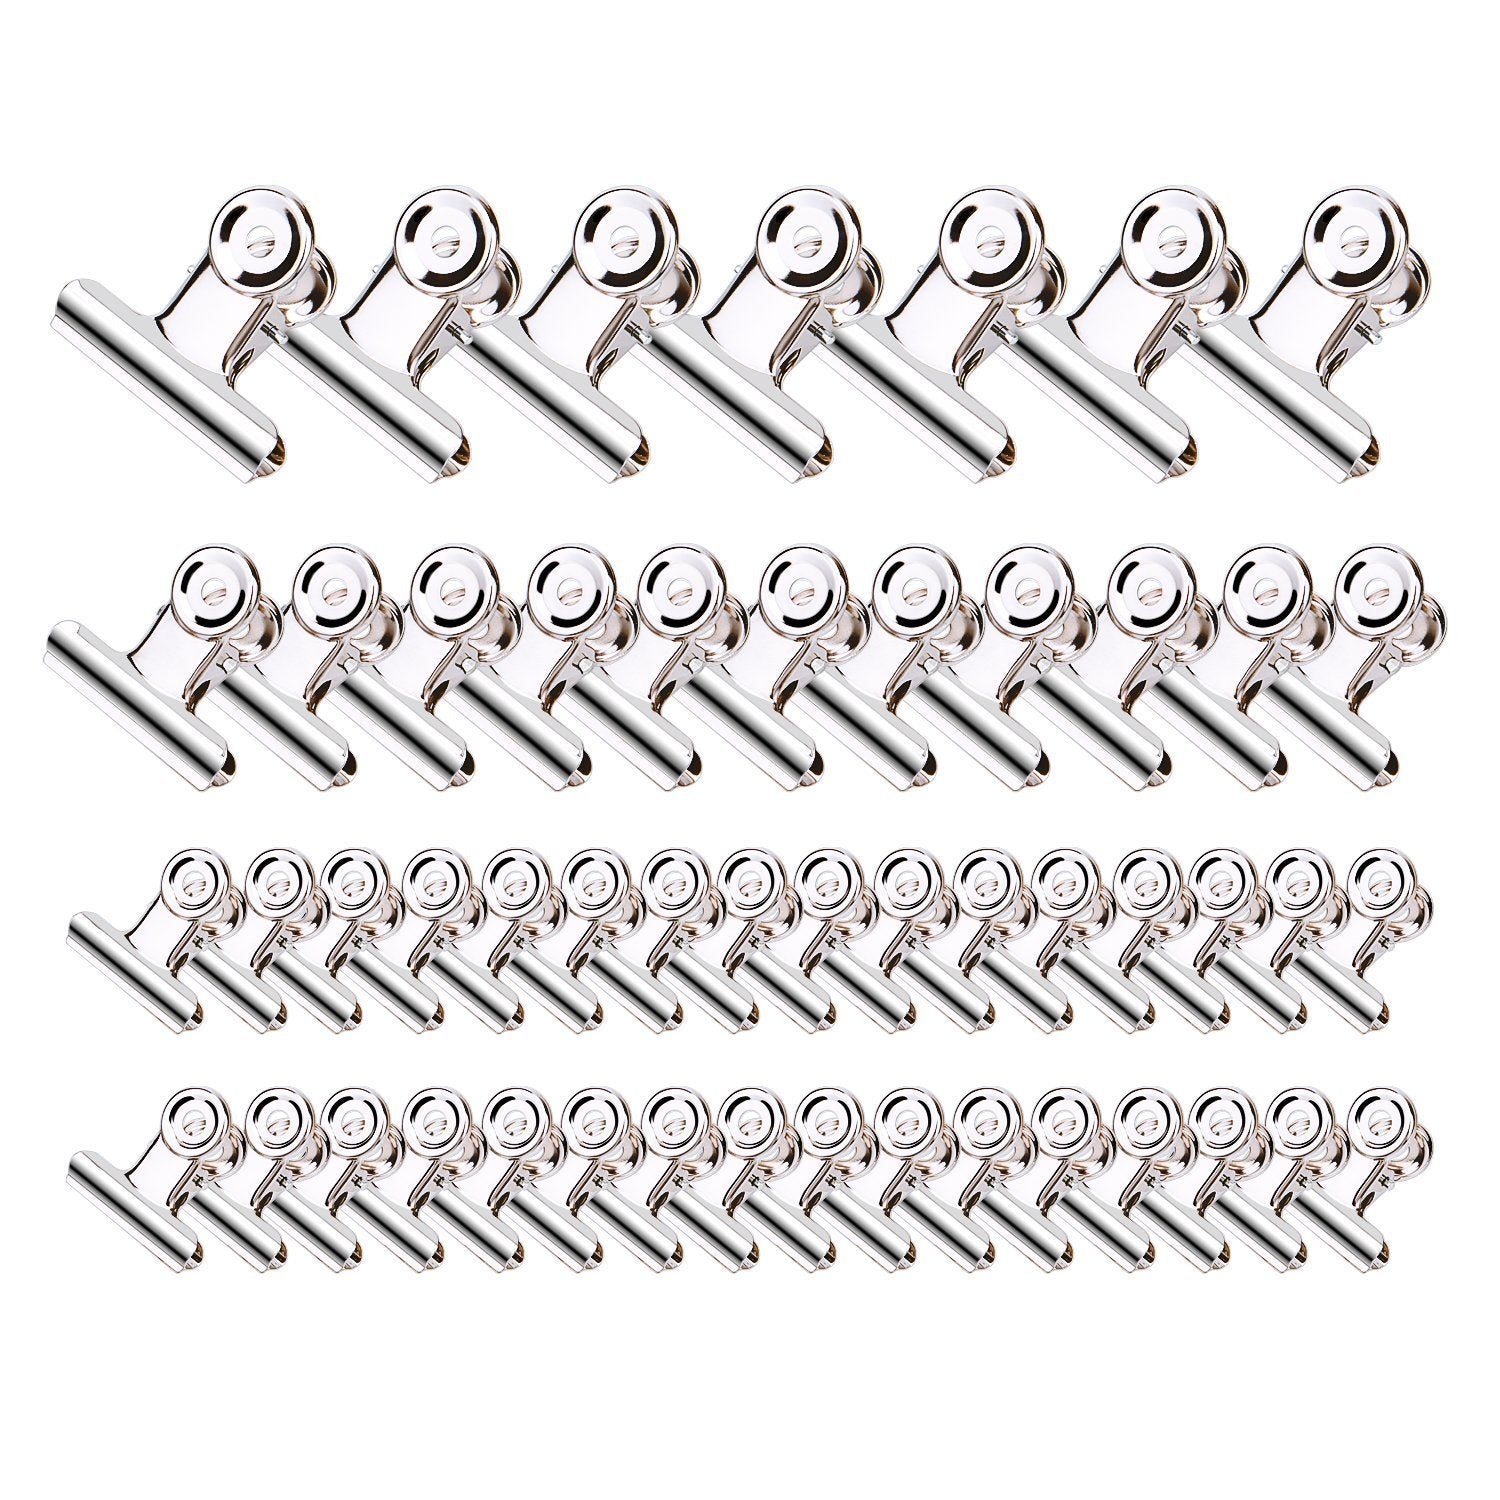 Best sunmns 50 pieces stainless steel clips heavy duty metal clip for photos bags kitchen home office usage 3 sizes 1 18 1 5 2 inch